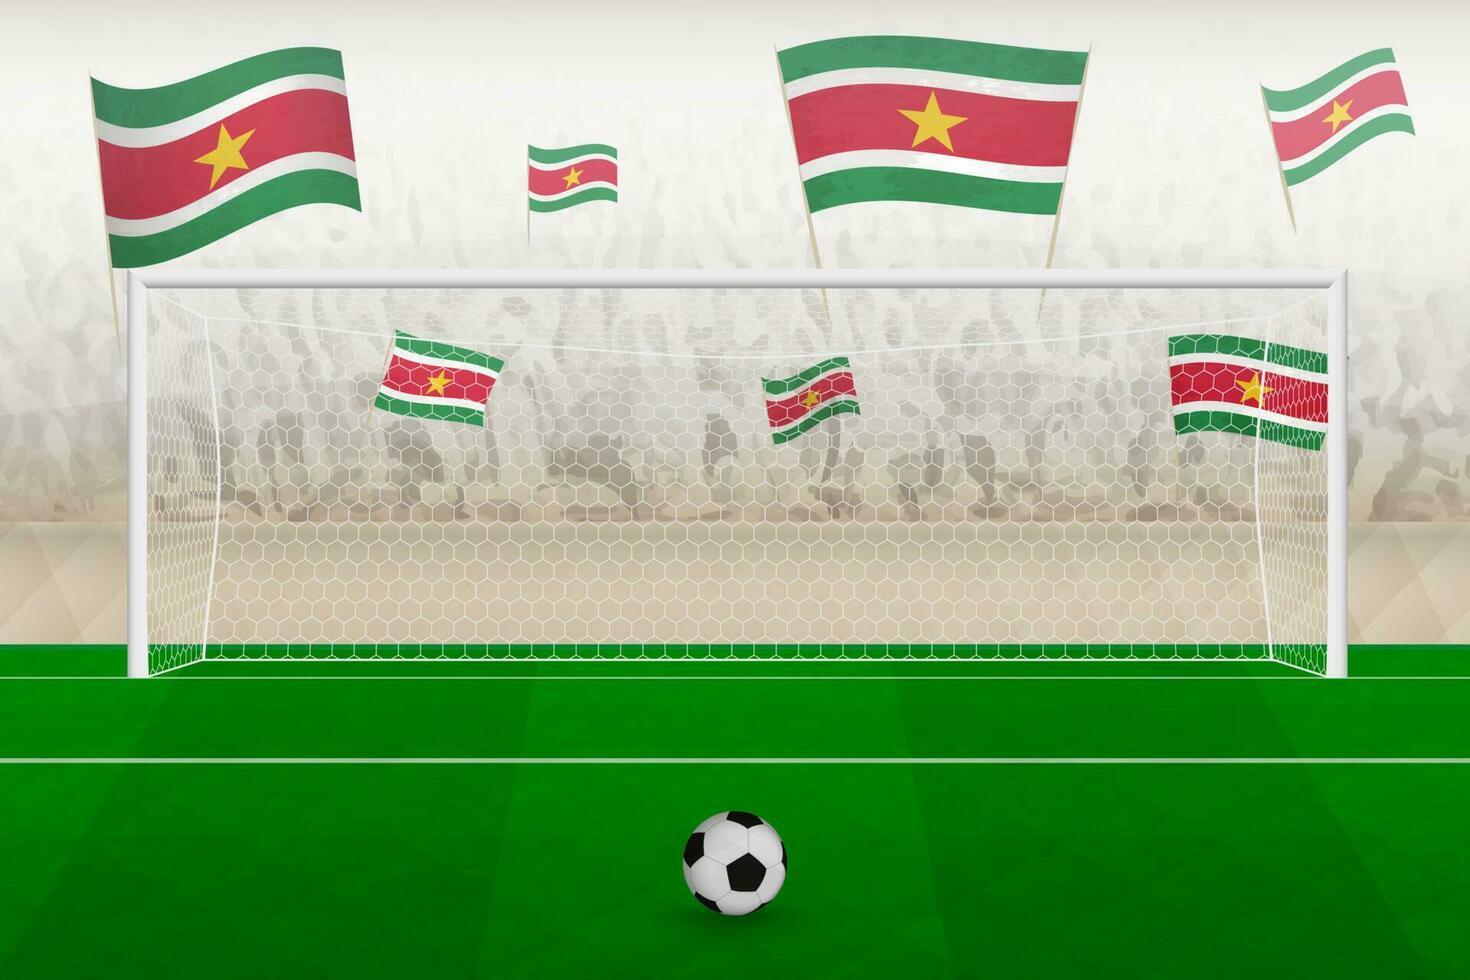 Suriname football team fans with flags of Suriname cheering on stadium, penalty kick concept in a soccer match. vector